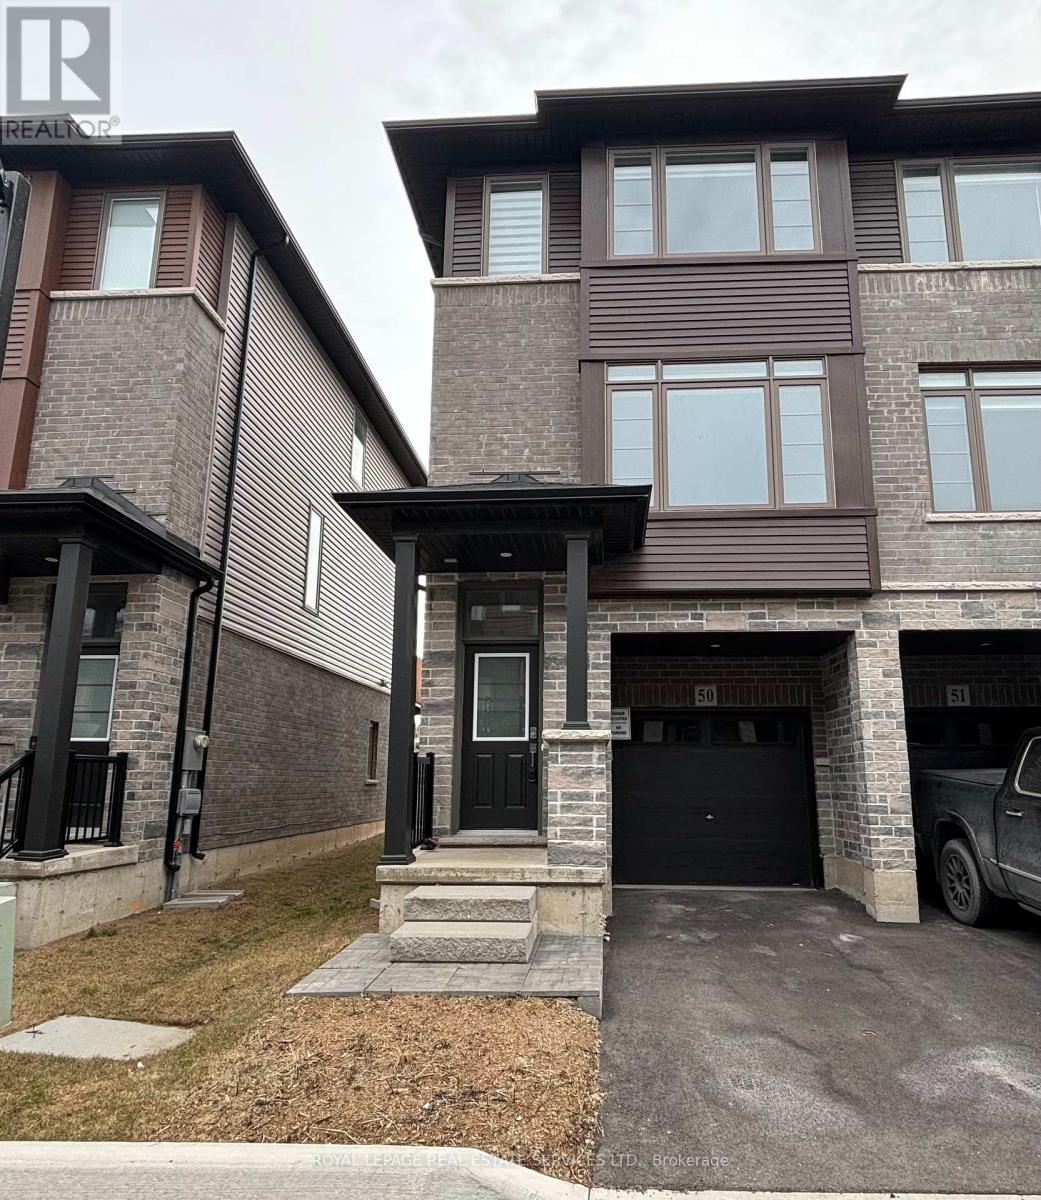 #50 -5000 CONNOR DR located in Lincoln, Ontario